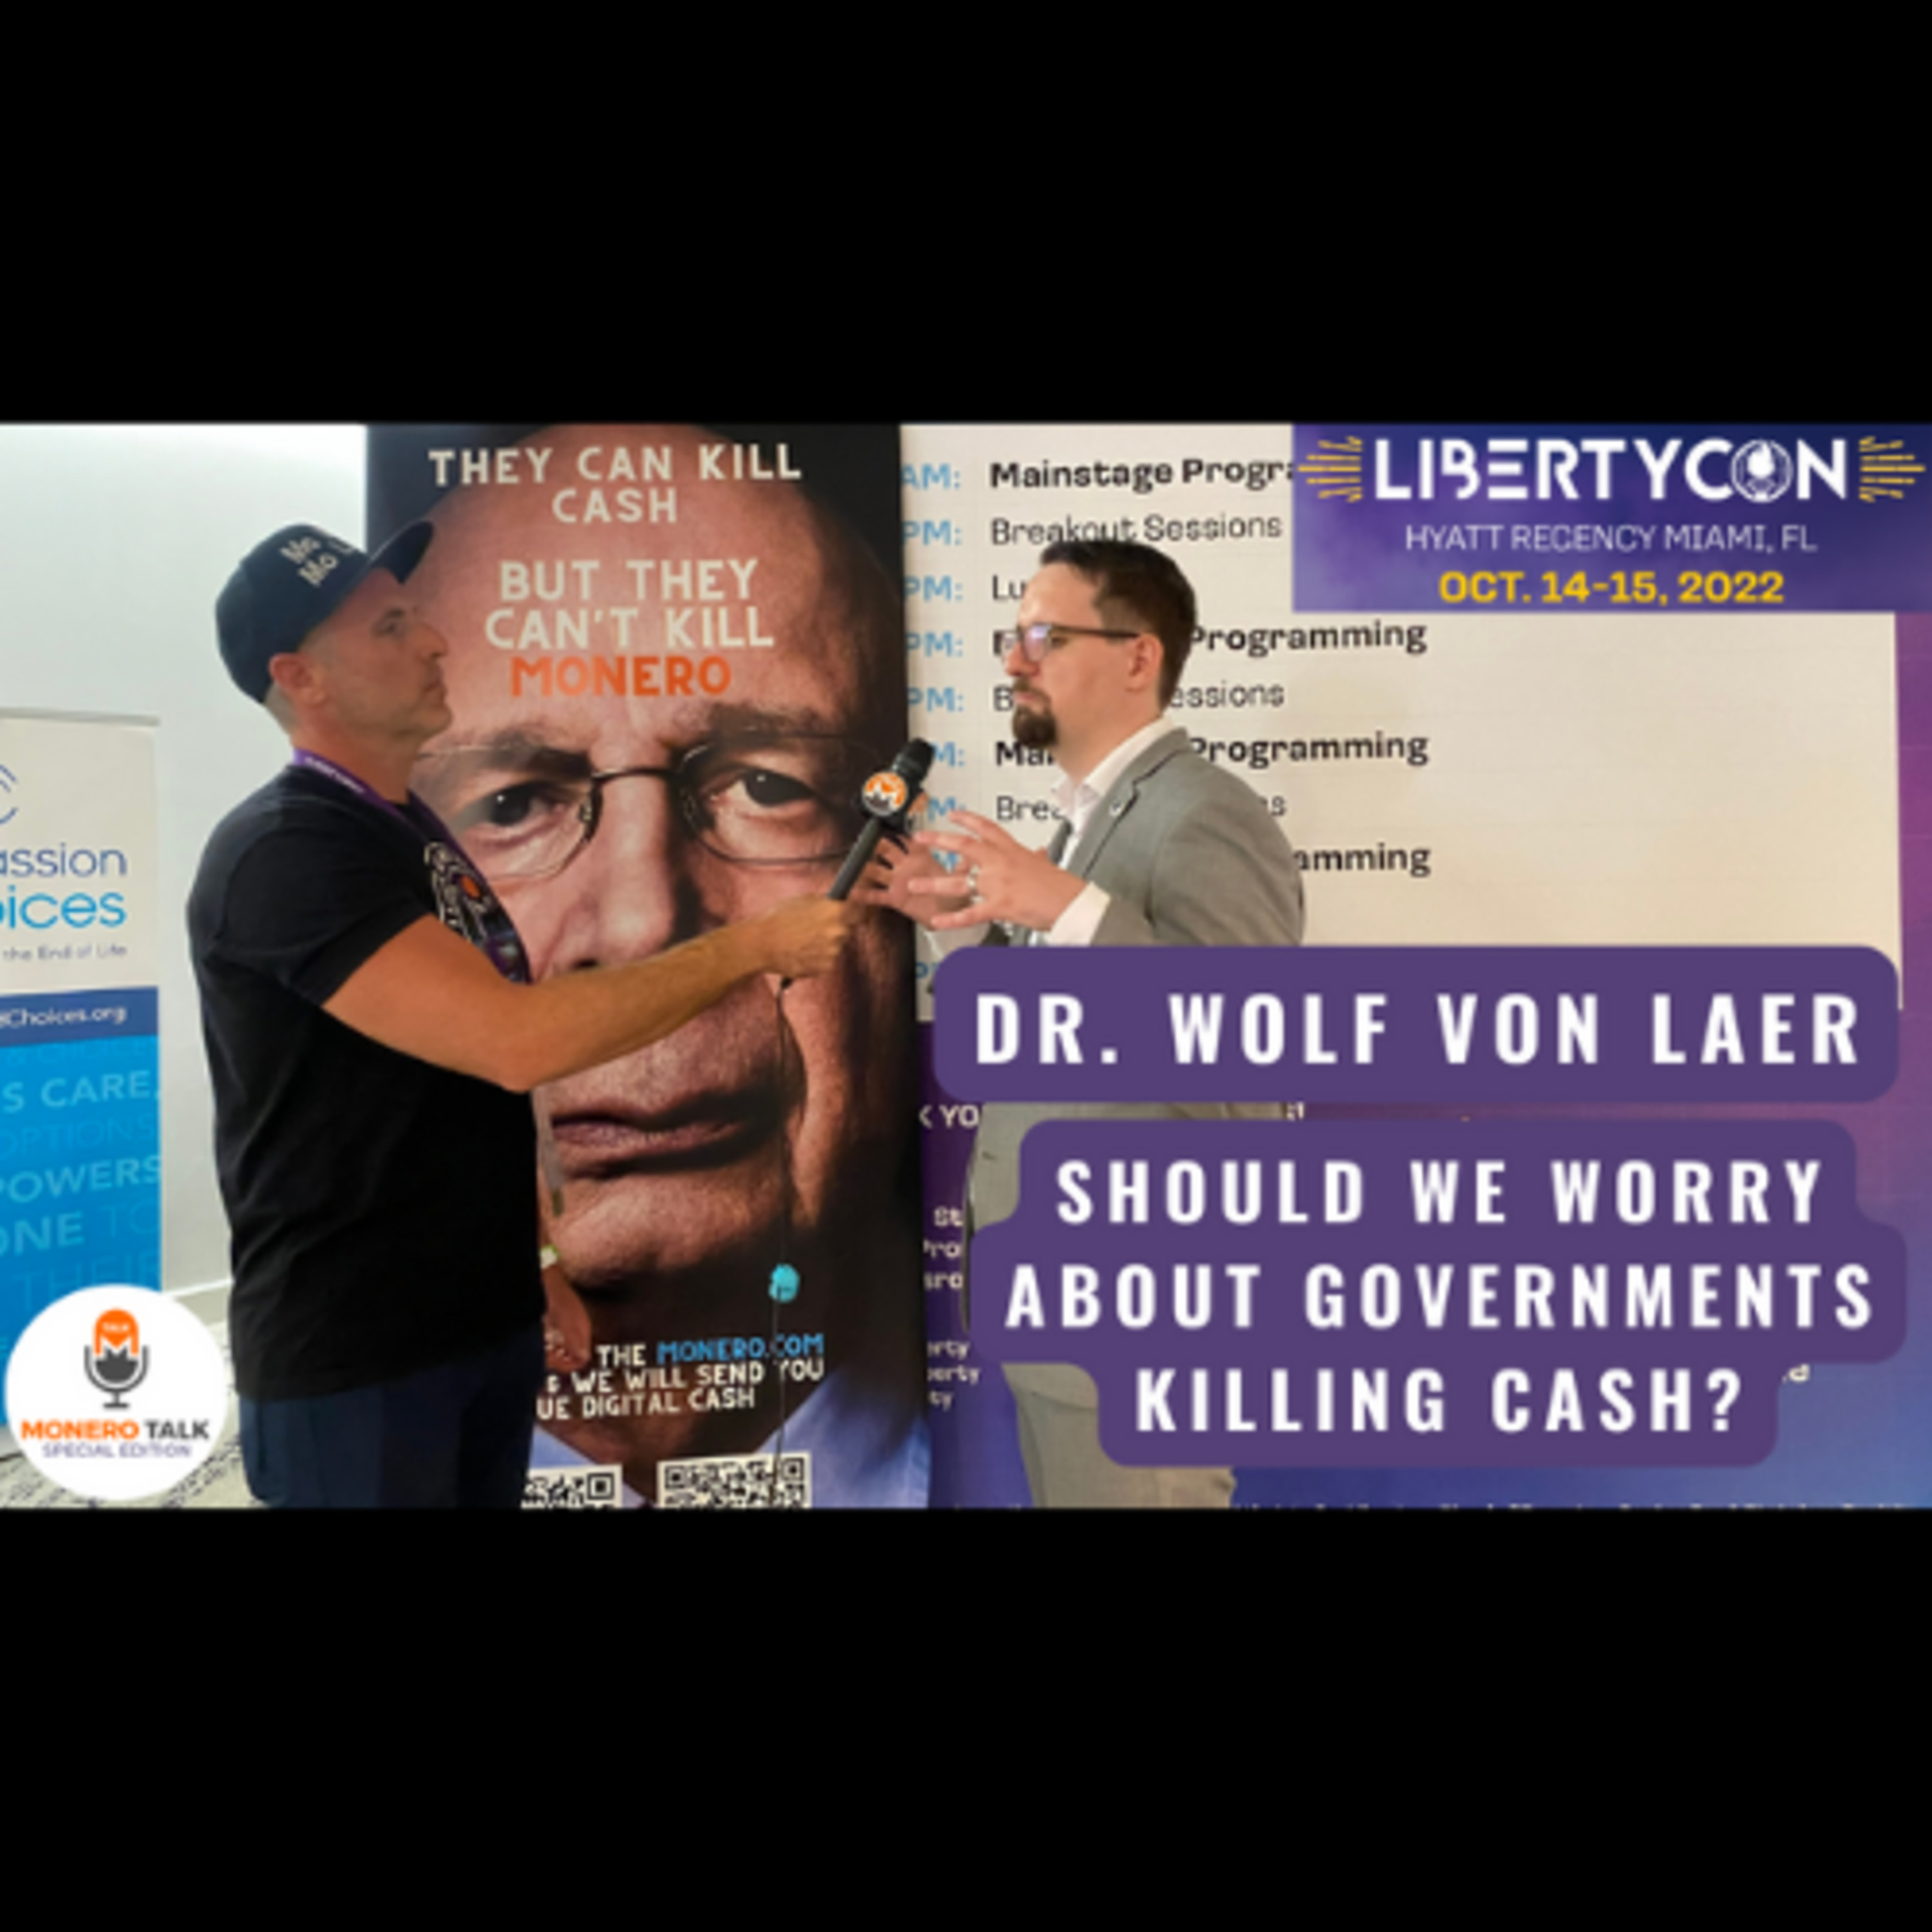 Should we worry about governments killing cash? - Dr. Wolf von Laer